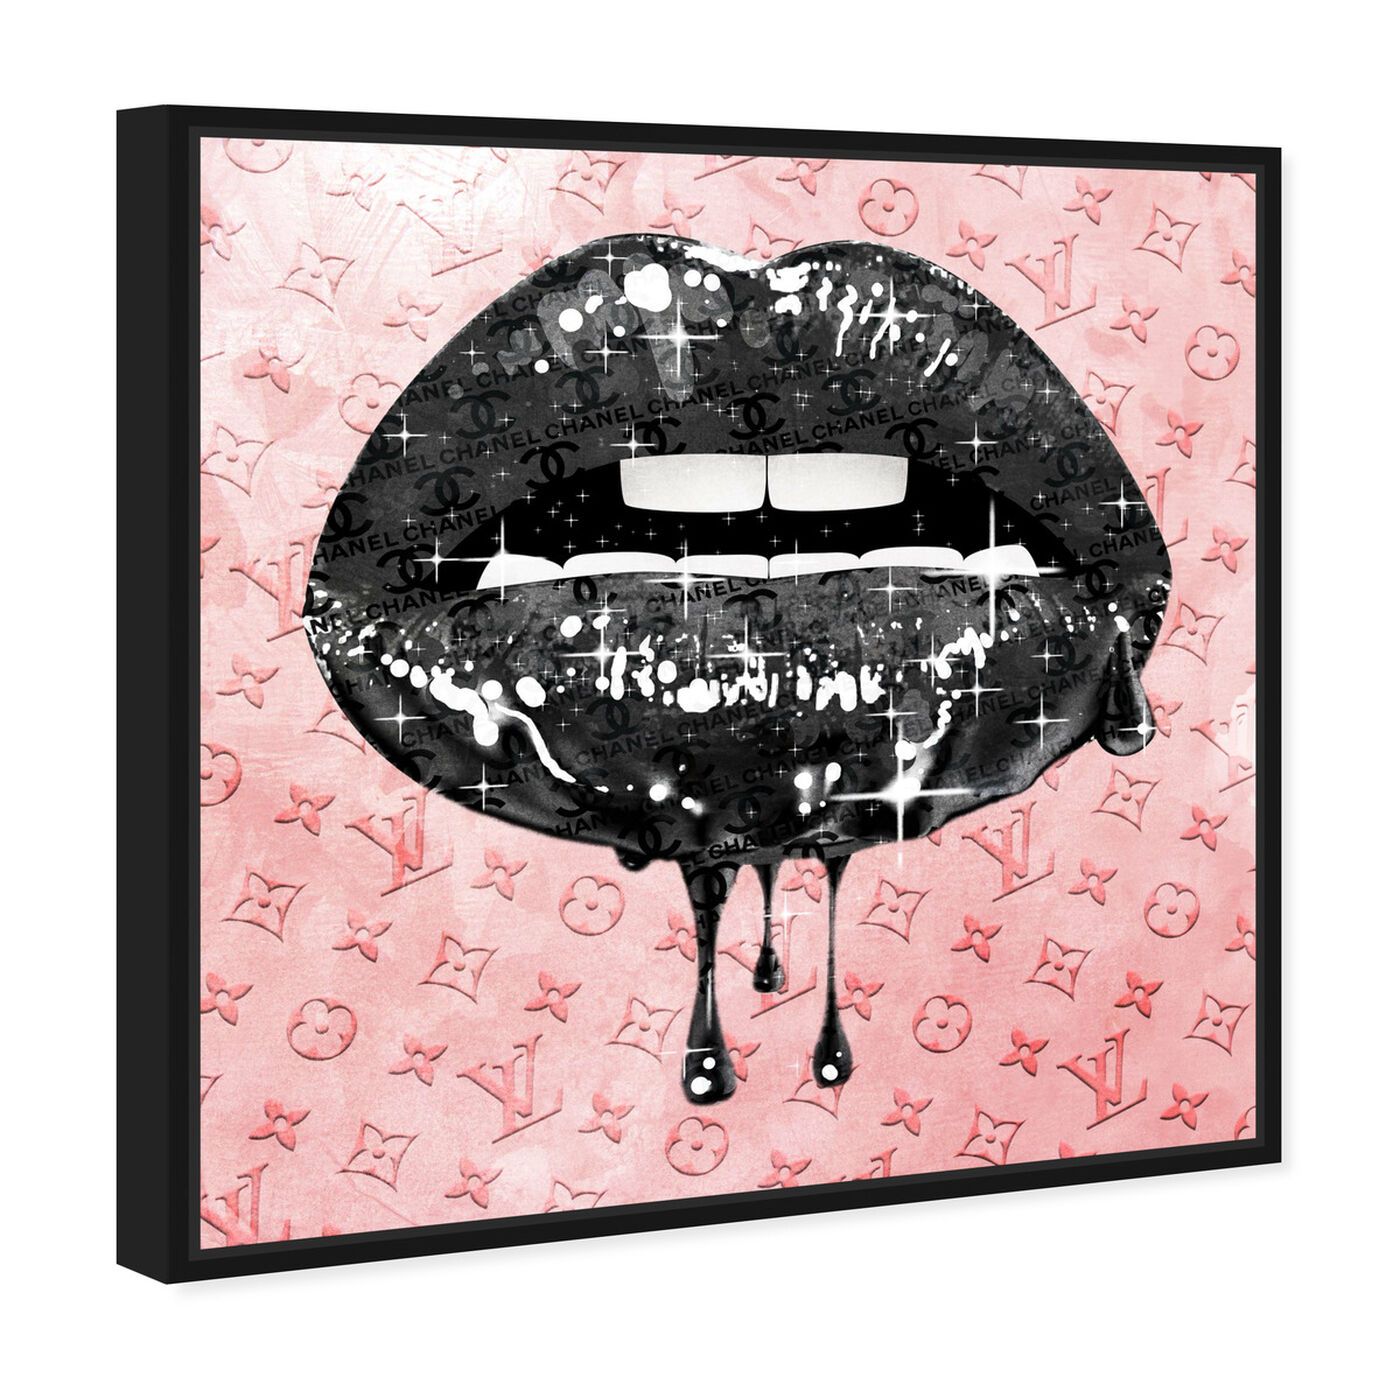 Fashion and Glam Noir and Blush Lips - Graphic Art Print Willa Arlo Interiors Format: Black Framed Canvas, Size: 40 H x 40 W x 2 D